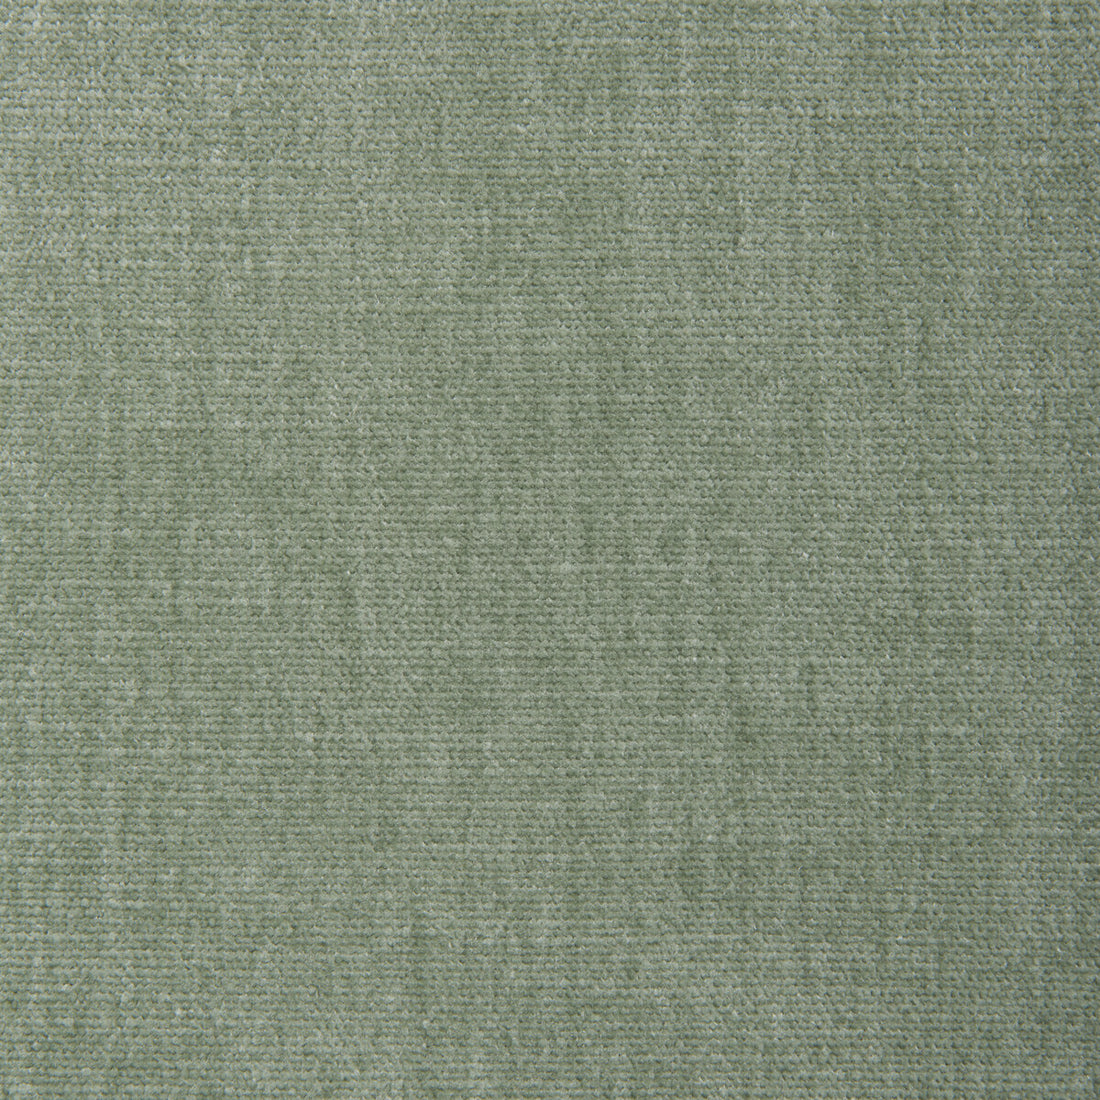 Kravet Smart fabric in 36076-130 color - pattern 36076.130.0 - by Kravet Smart in the Sumptuous Chenille II collection